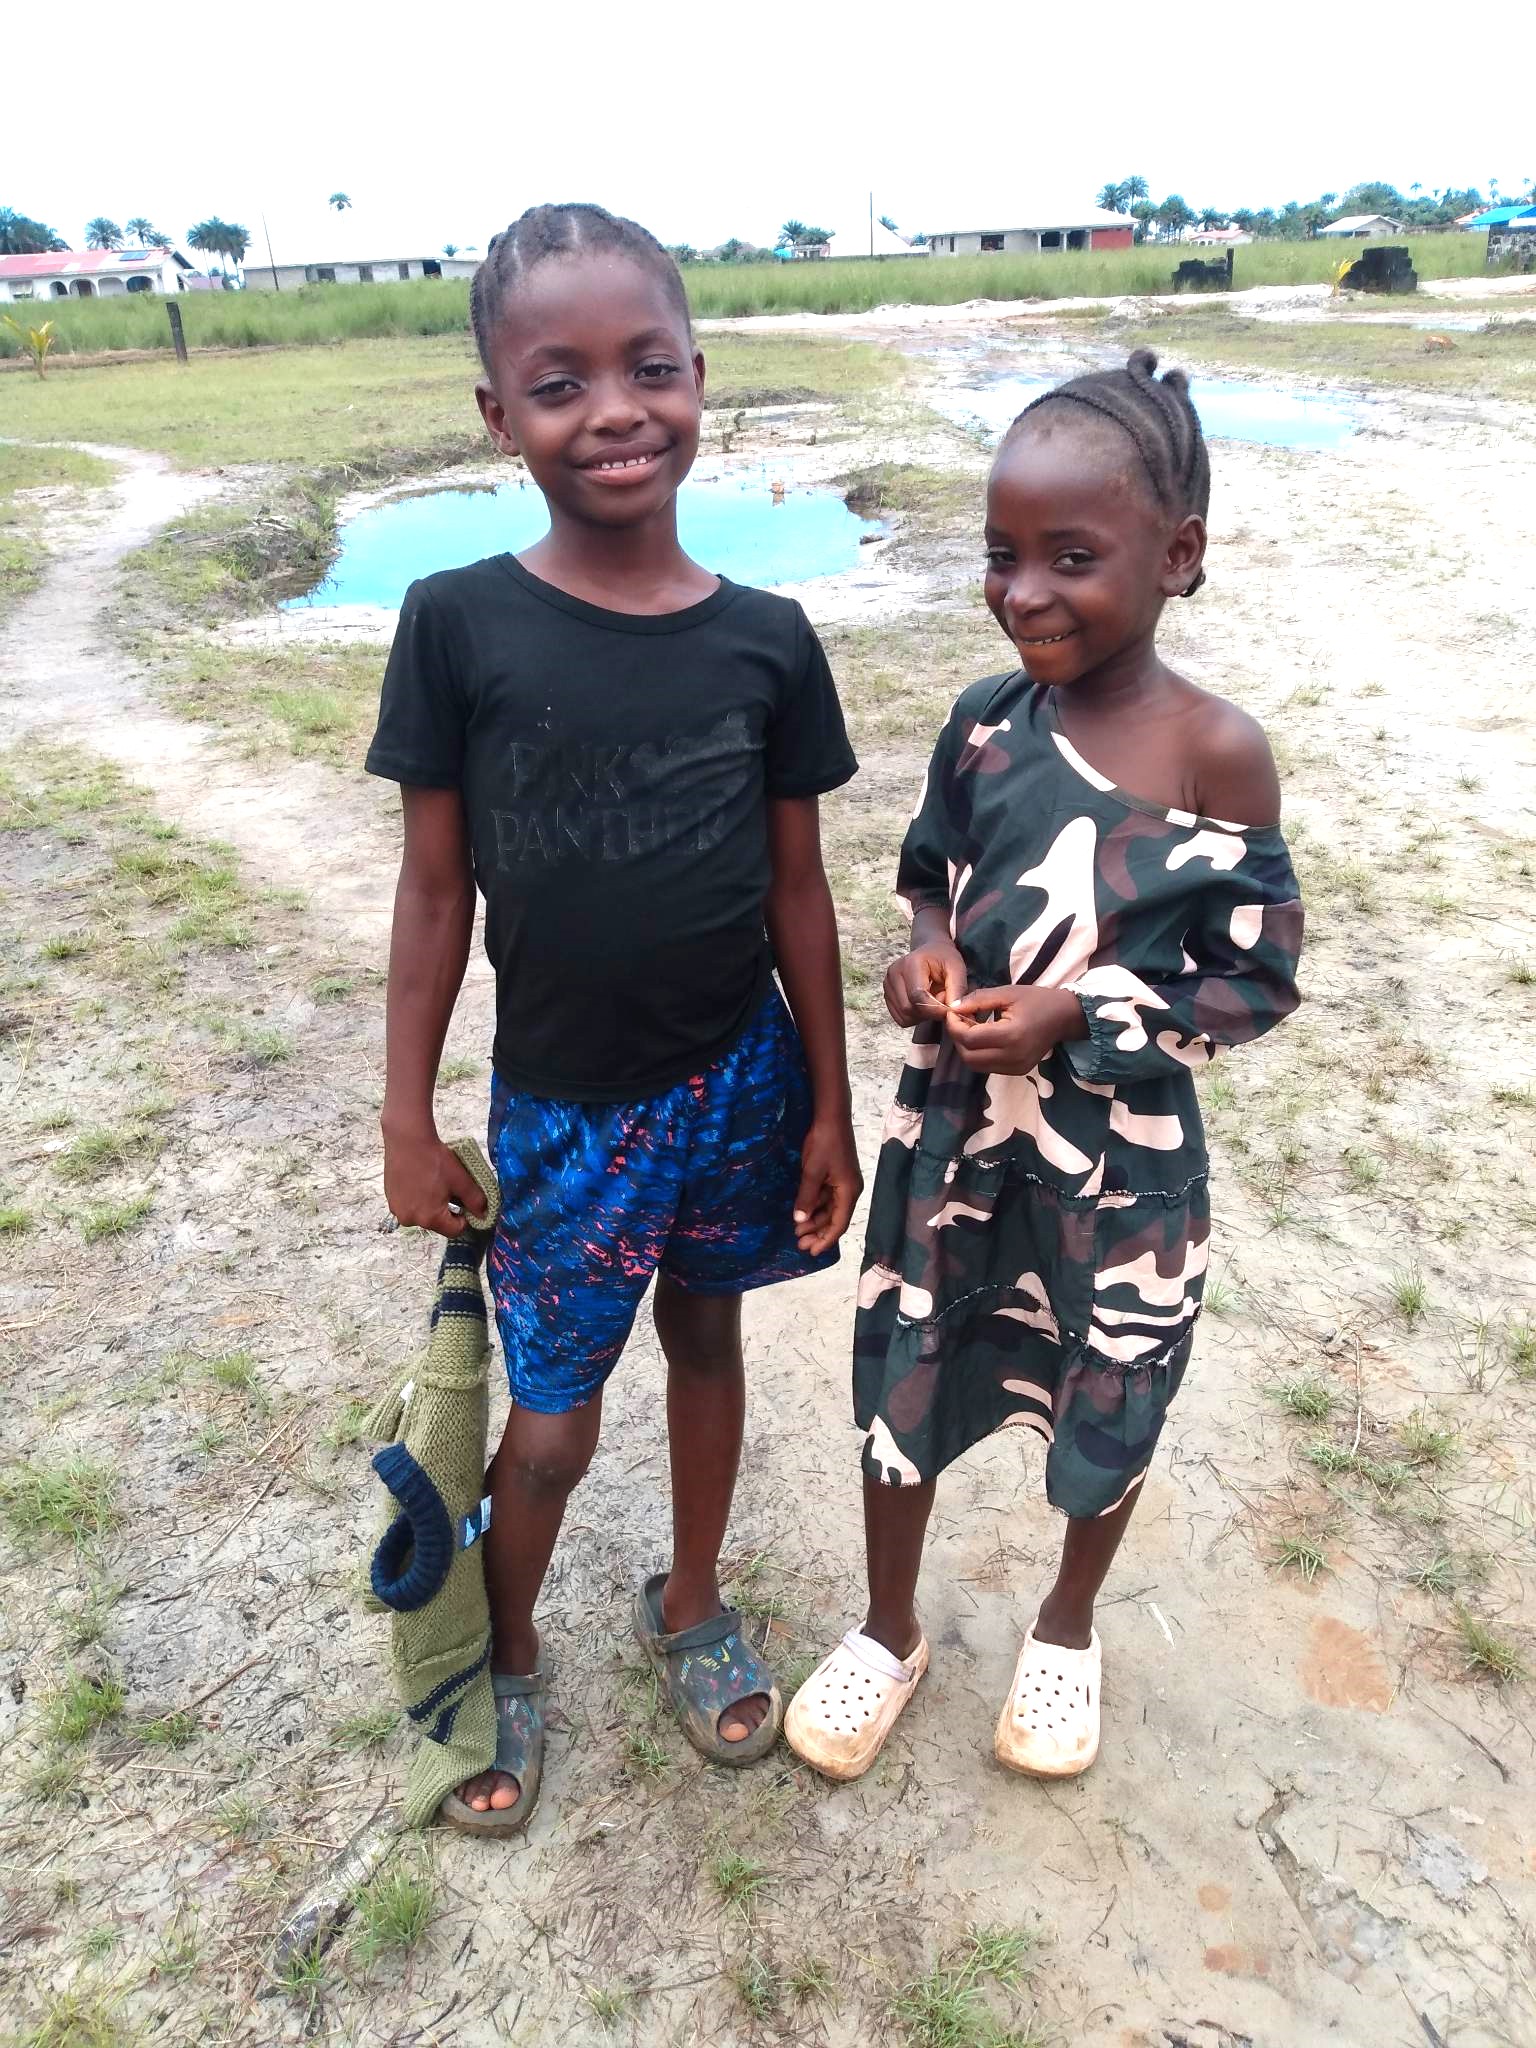 Shirley is 10 yrs old and would be in Gr. 3 this year.  Miatta is 6 yrs old and would start Gr. 1.  Both are orphan children that Pastor Malcolm recommended.